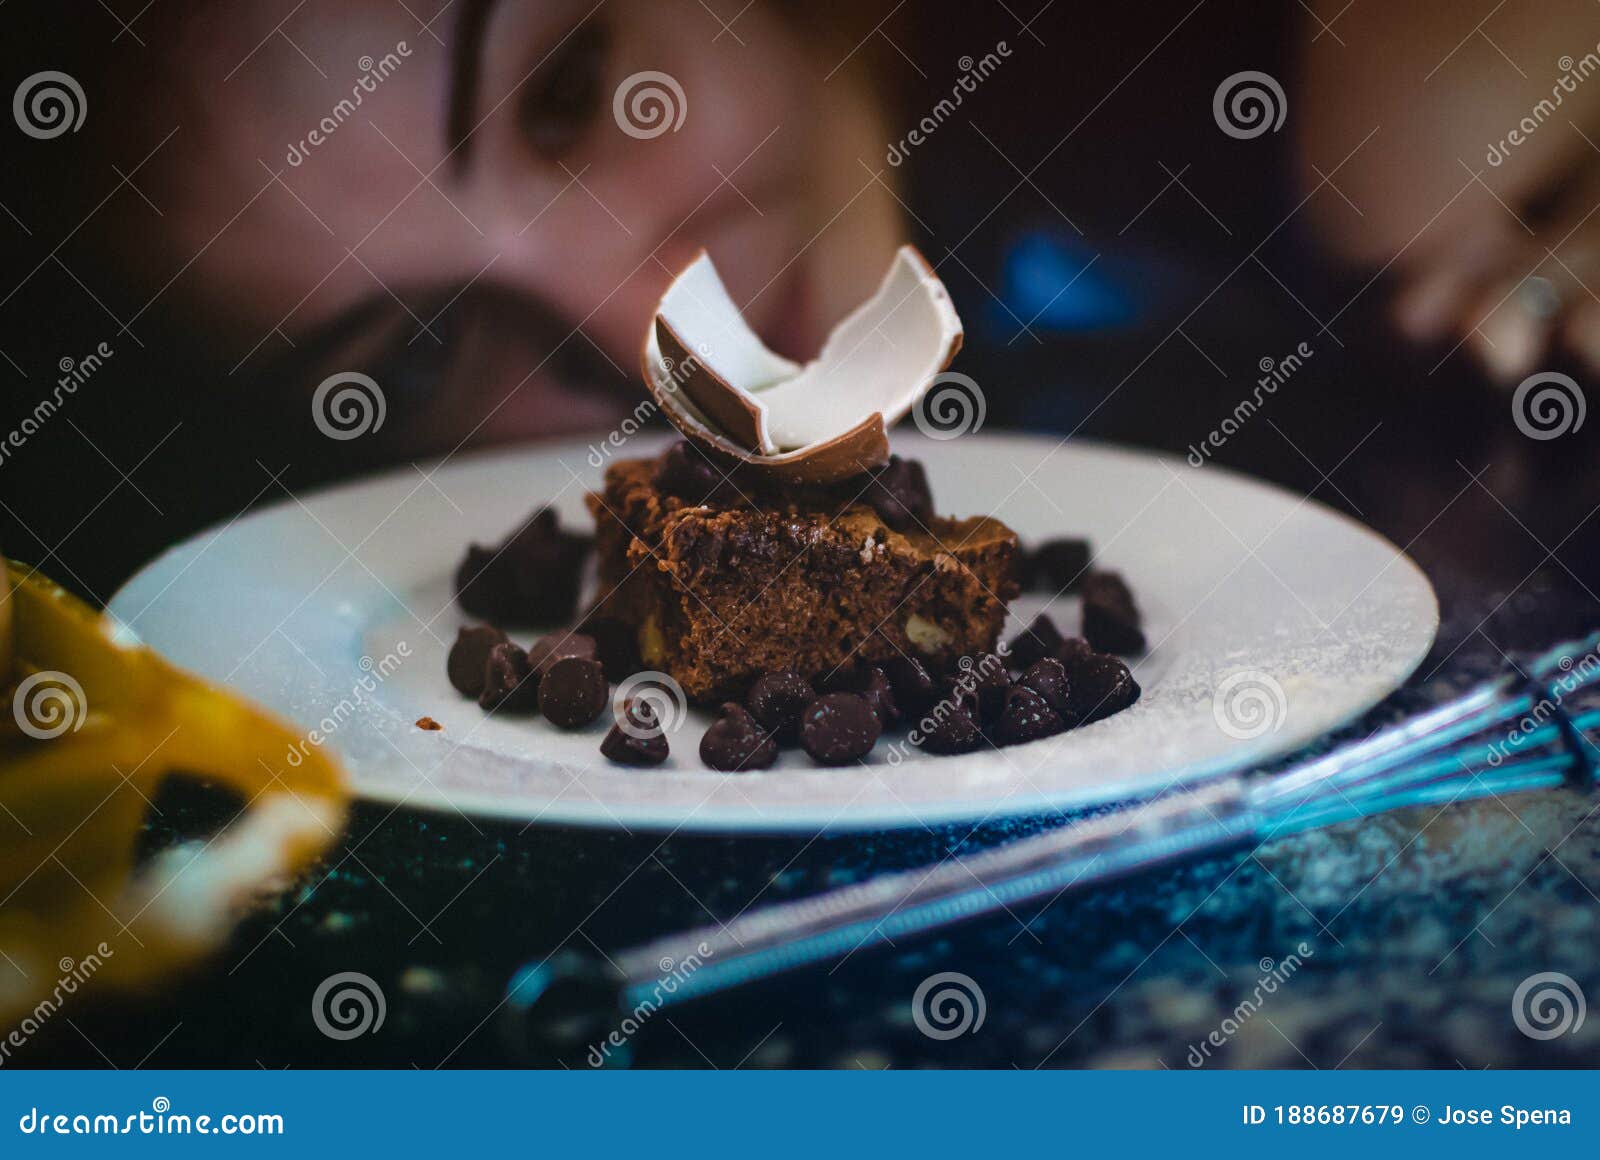 chocolate cake close up with girl at the back